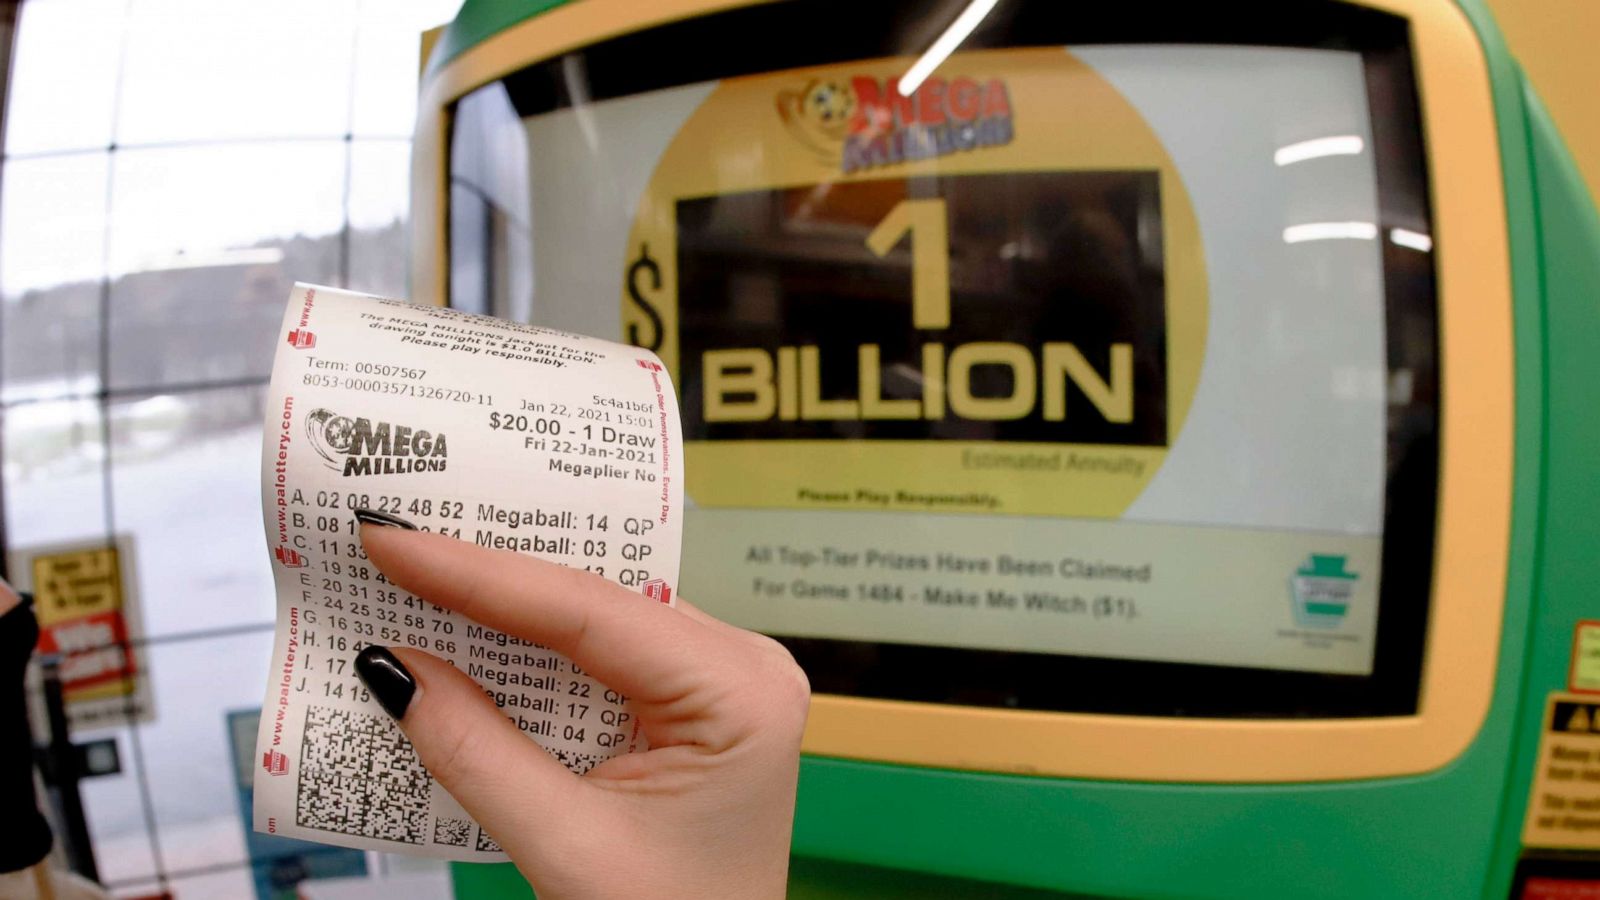 Person In Michigan Wins Mega Millions 1 Billion Jackpot 2nd Largest Total Ever Abc News